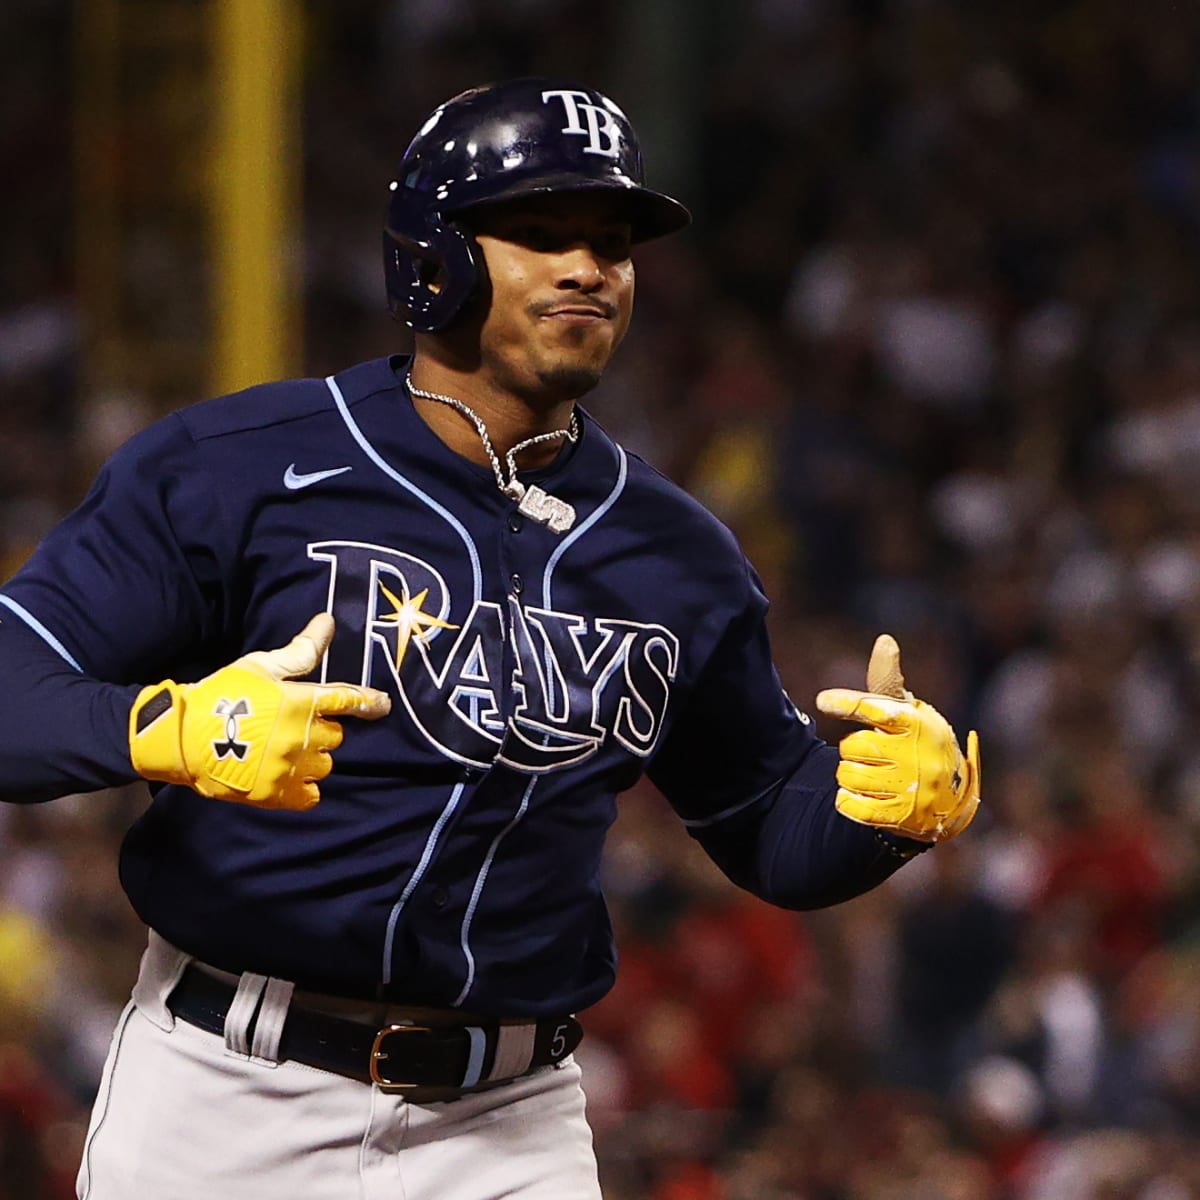 MLB, Dominican authorities investigating Rays' Franco for alleged  relationship with minor